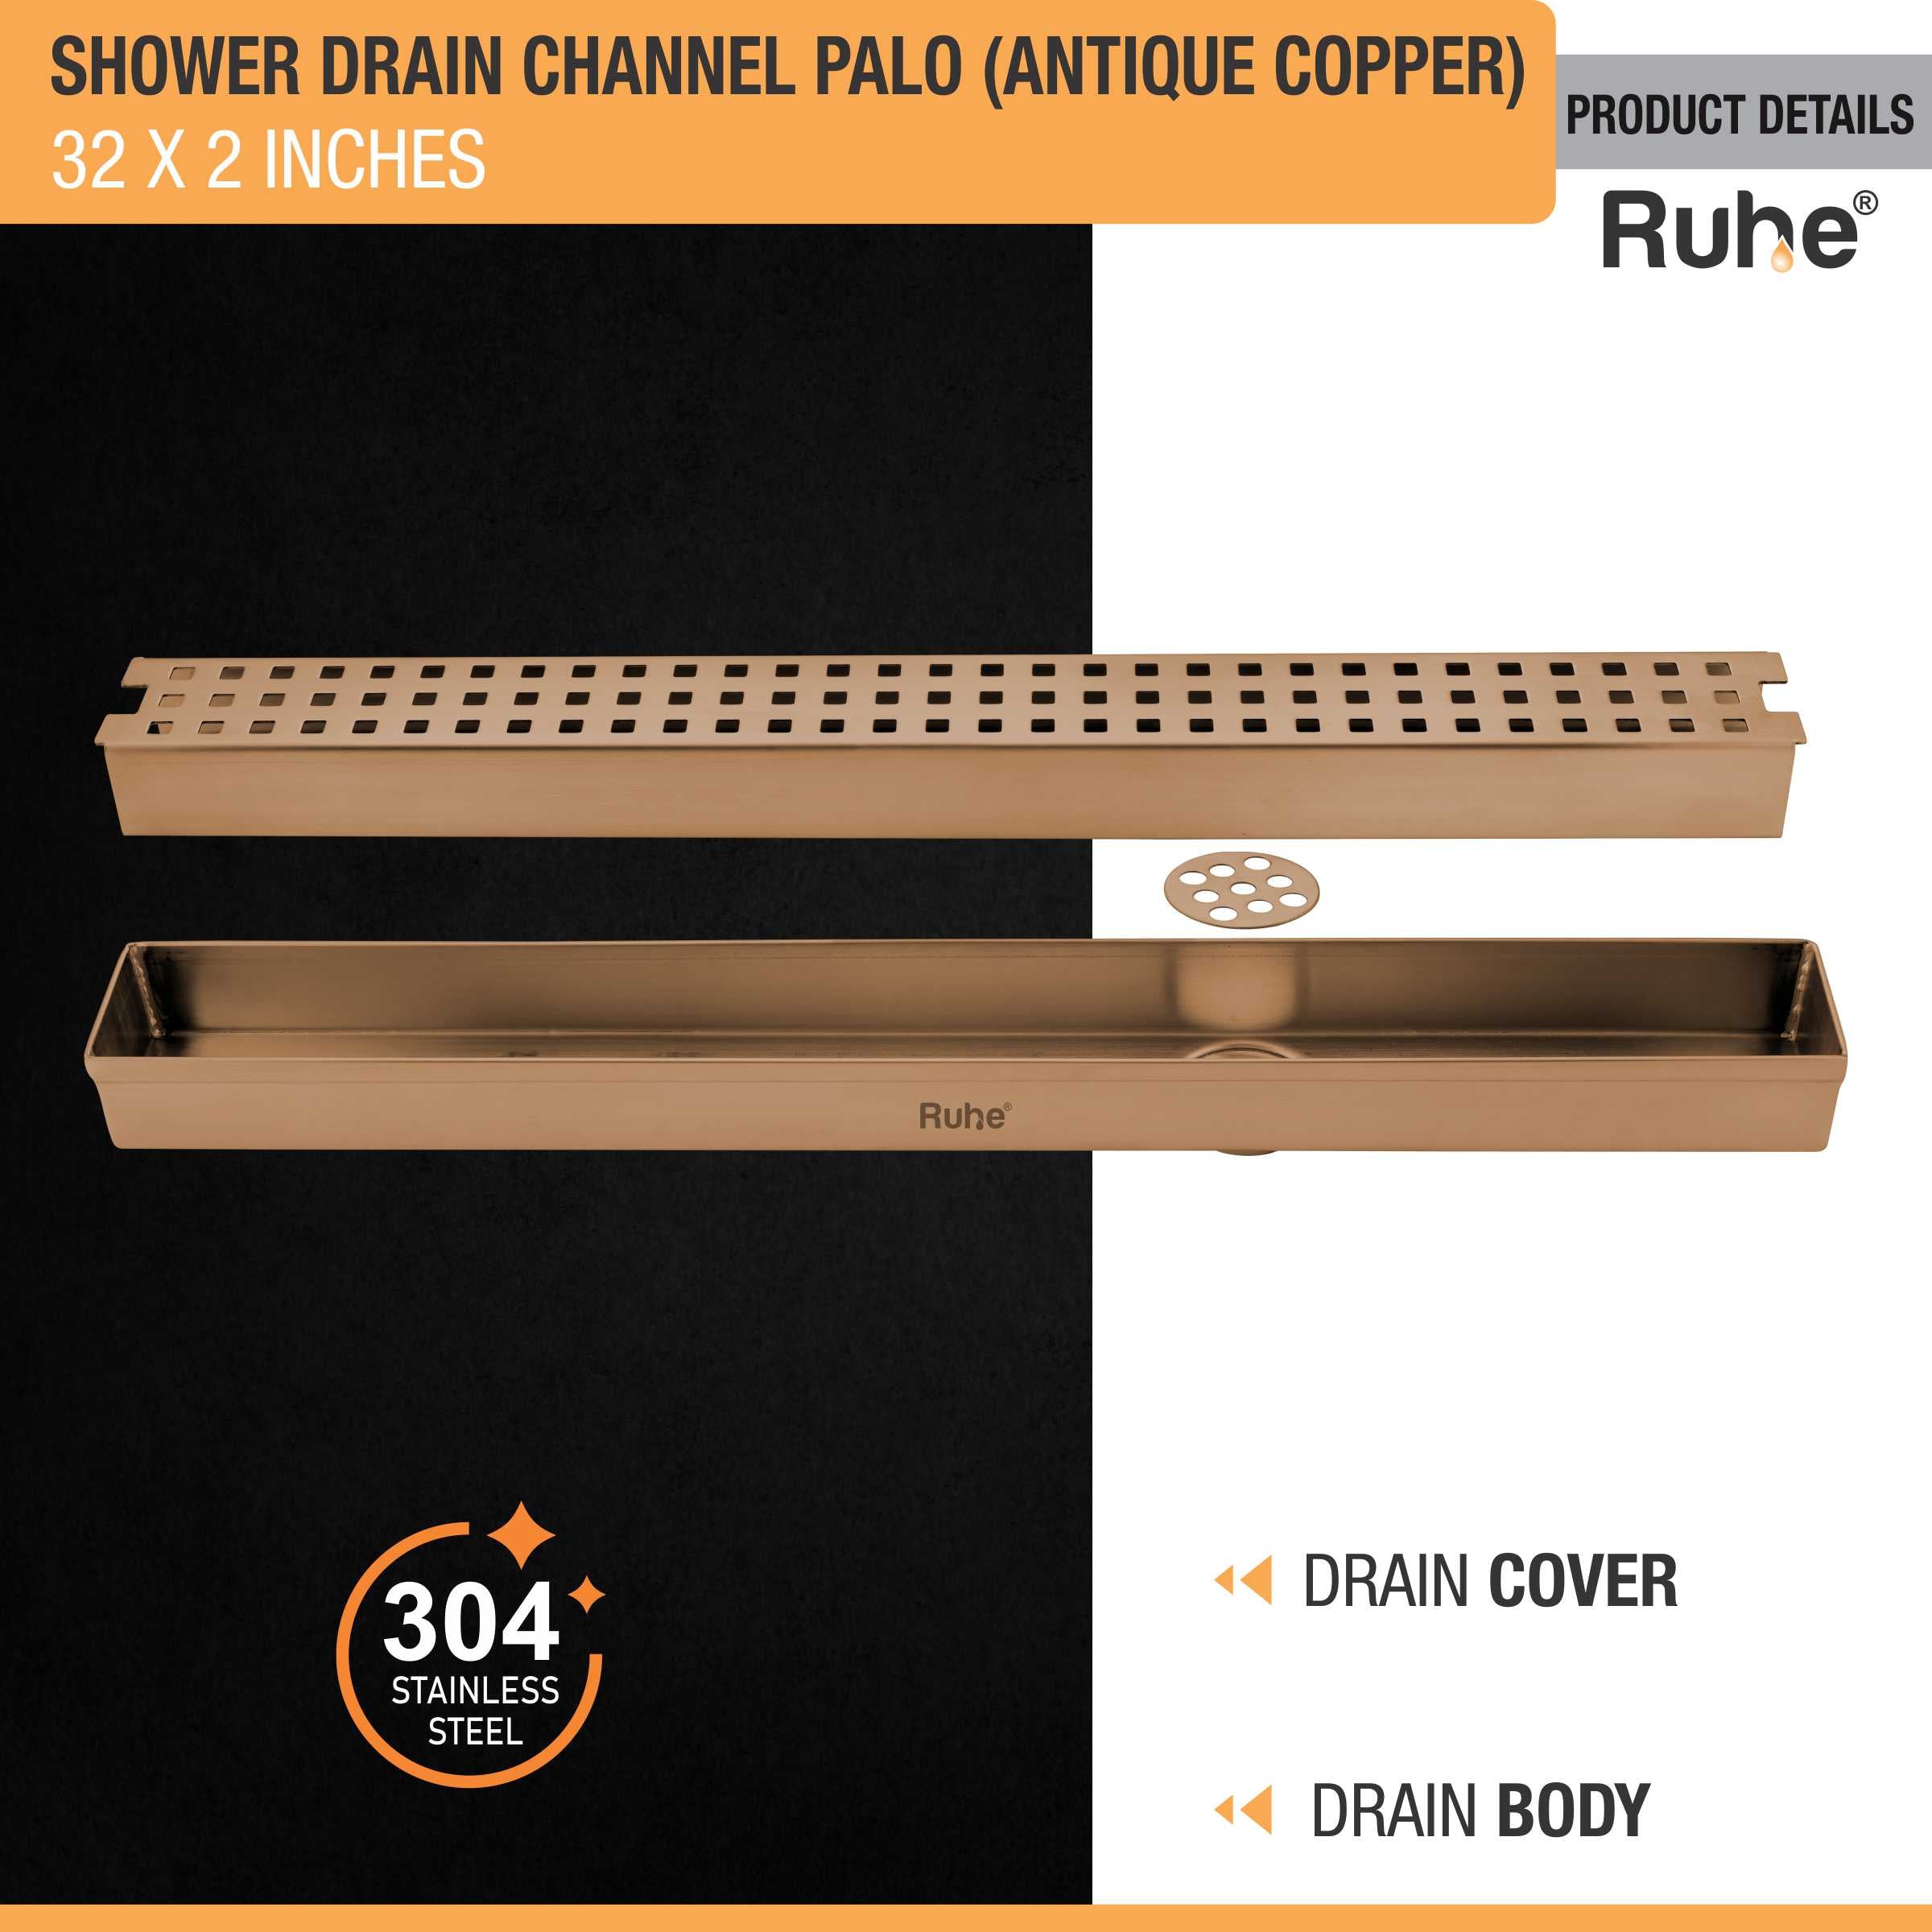 Palo Shower Drain Channel (32 x 2 Inches) ROSE GOLD/ANTIQUE COPPER product details